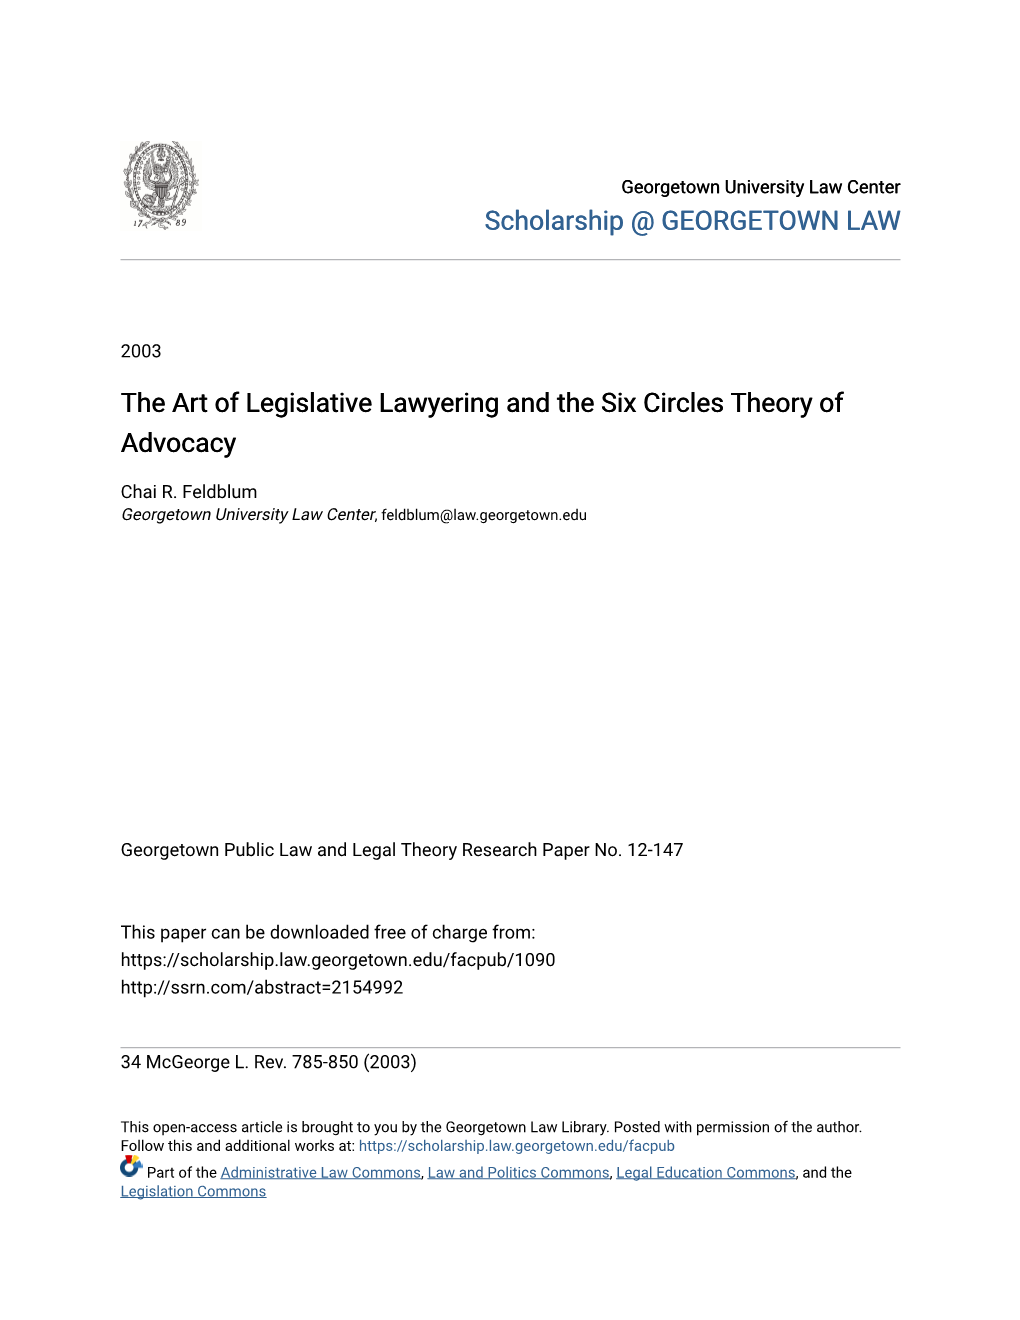 The Art of Legislative Lawyering and the Six Circles Theory of Advocacy